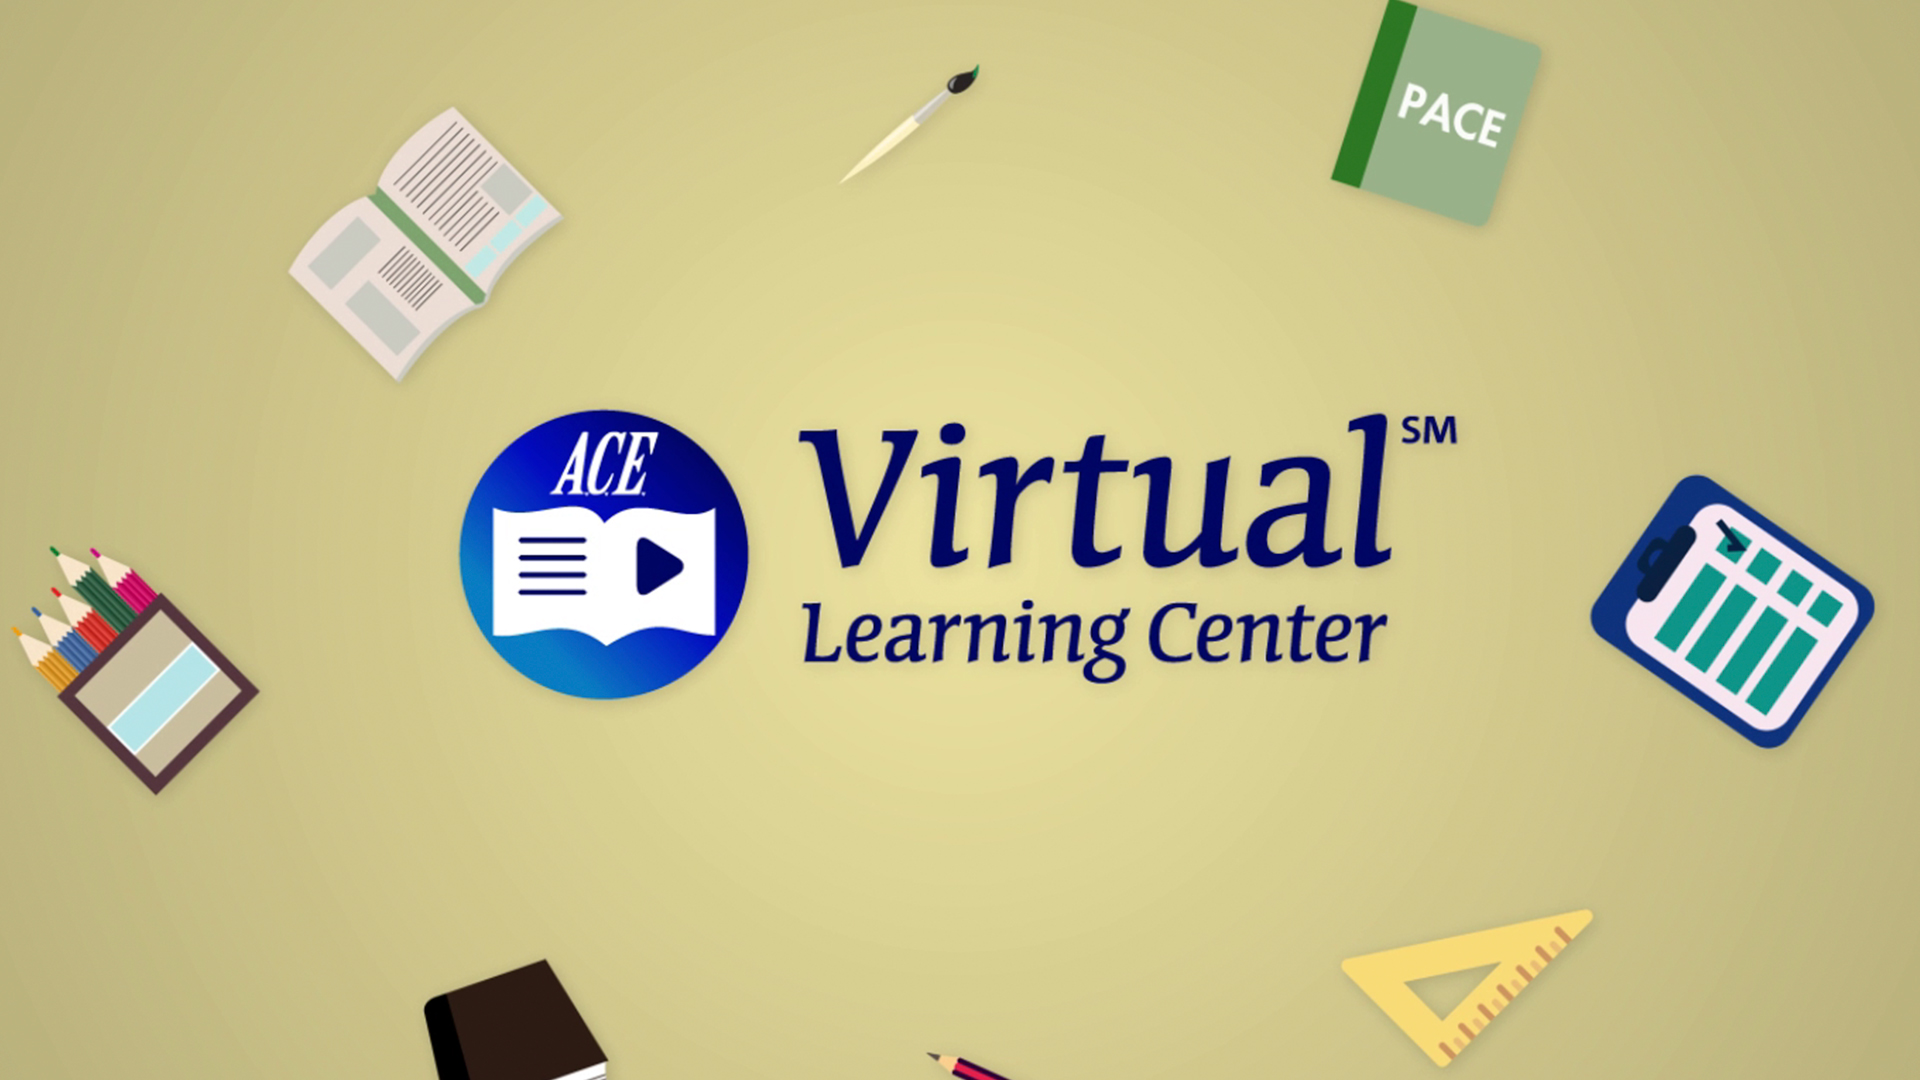 What Is a Virtual Learning Center?